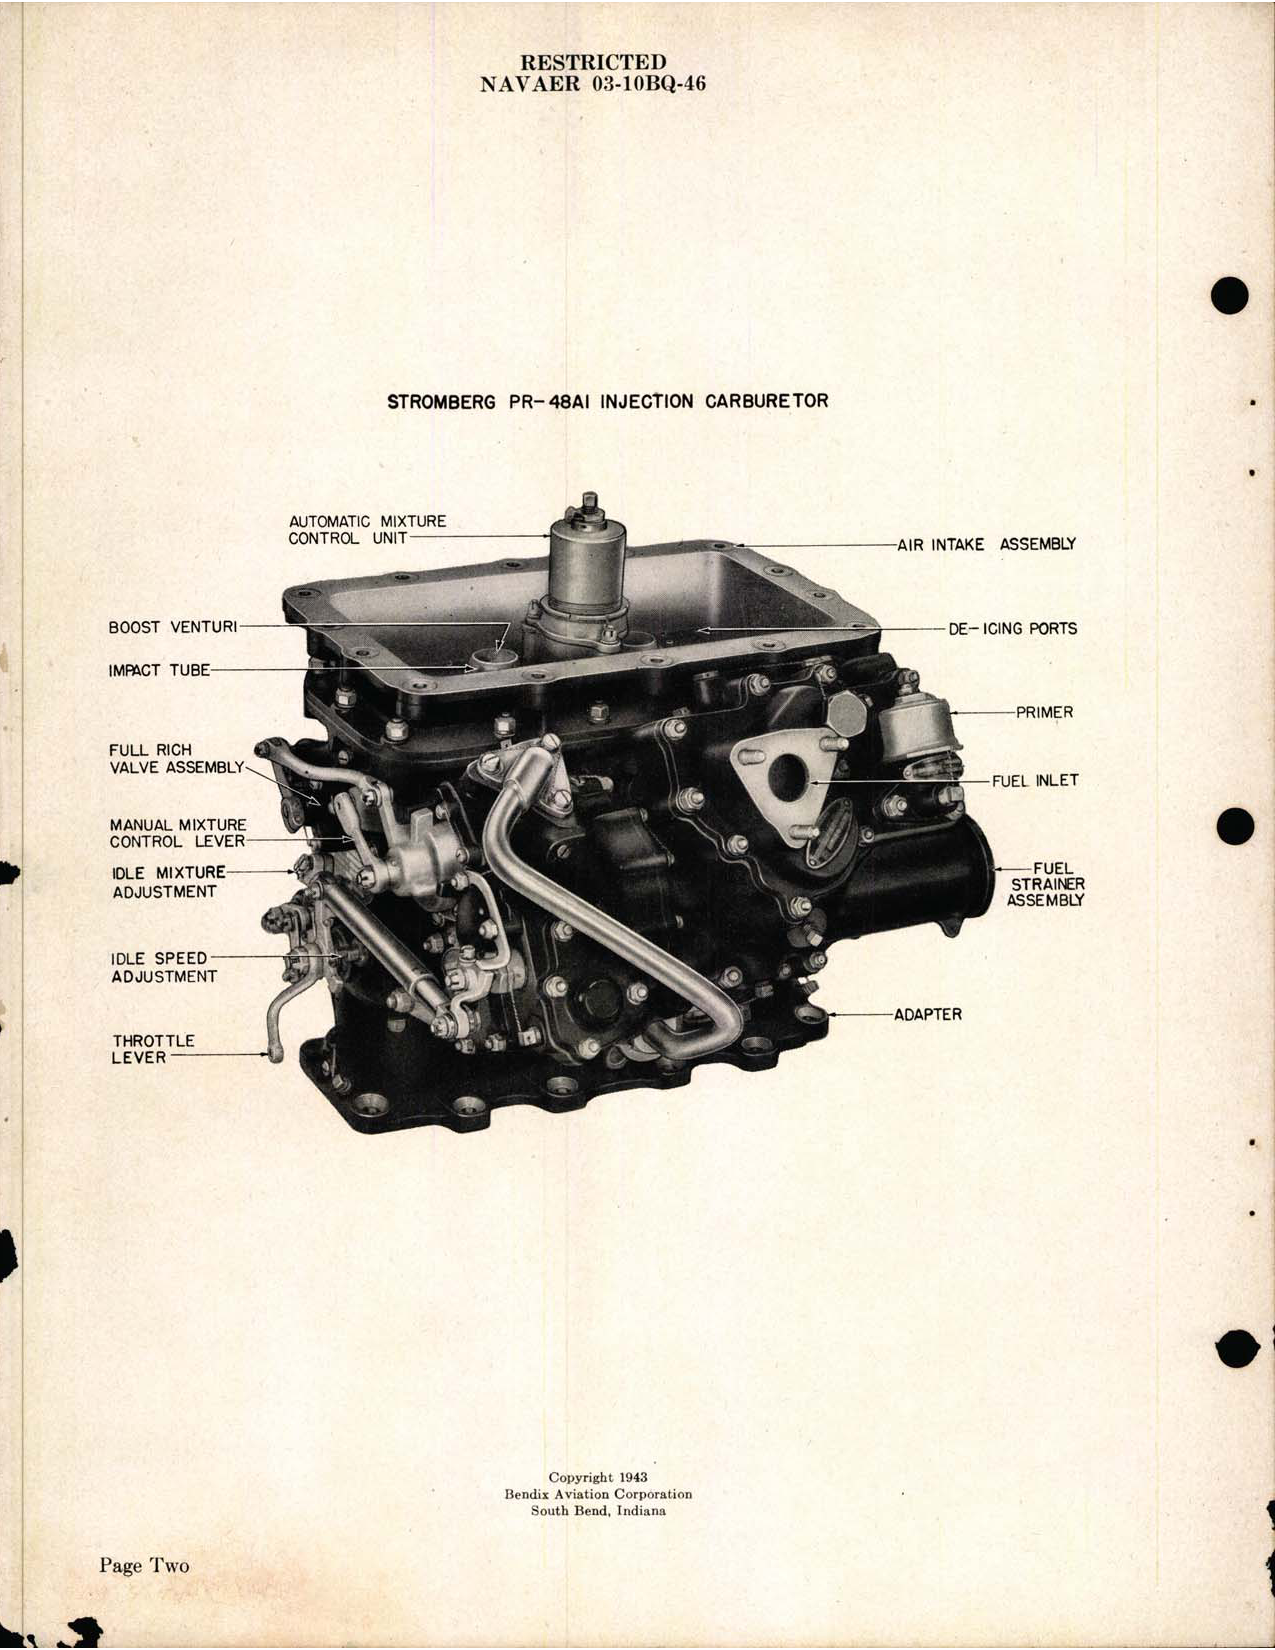 Sample page  4 from AirCorps Library document: PR-48A1 Injection Carburetors Instructions - 03-10BQ-46